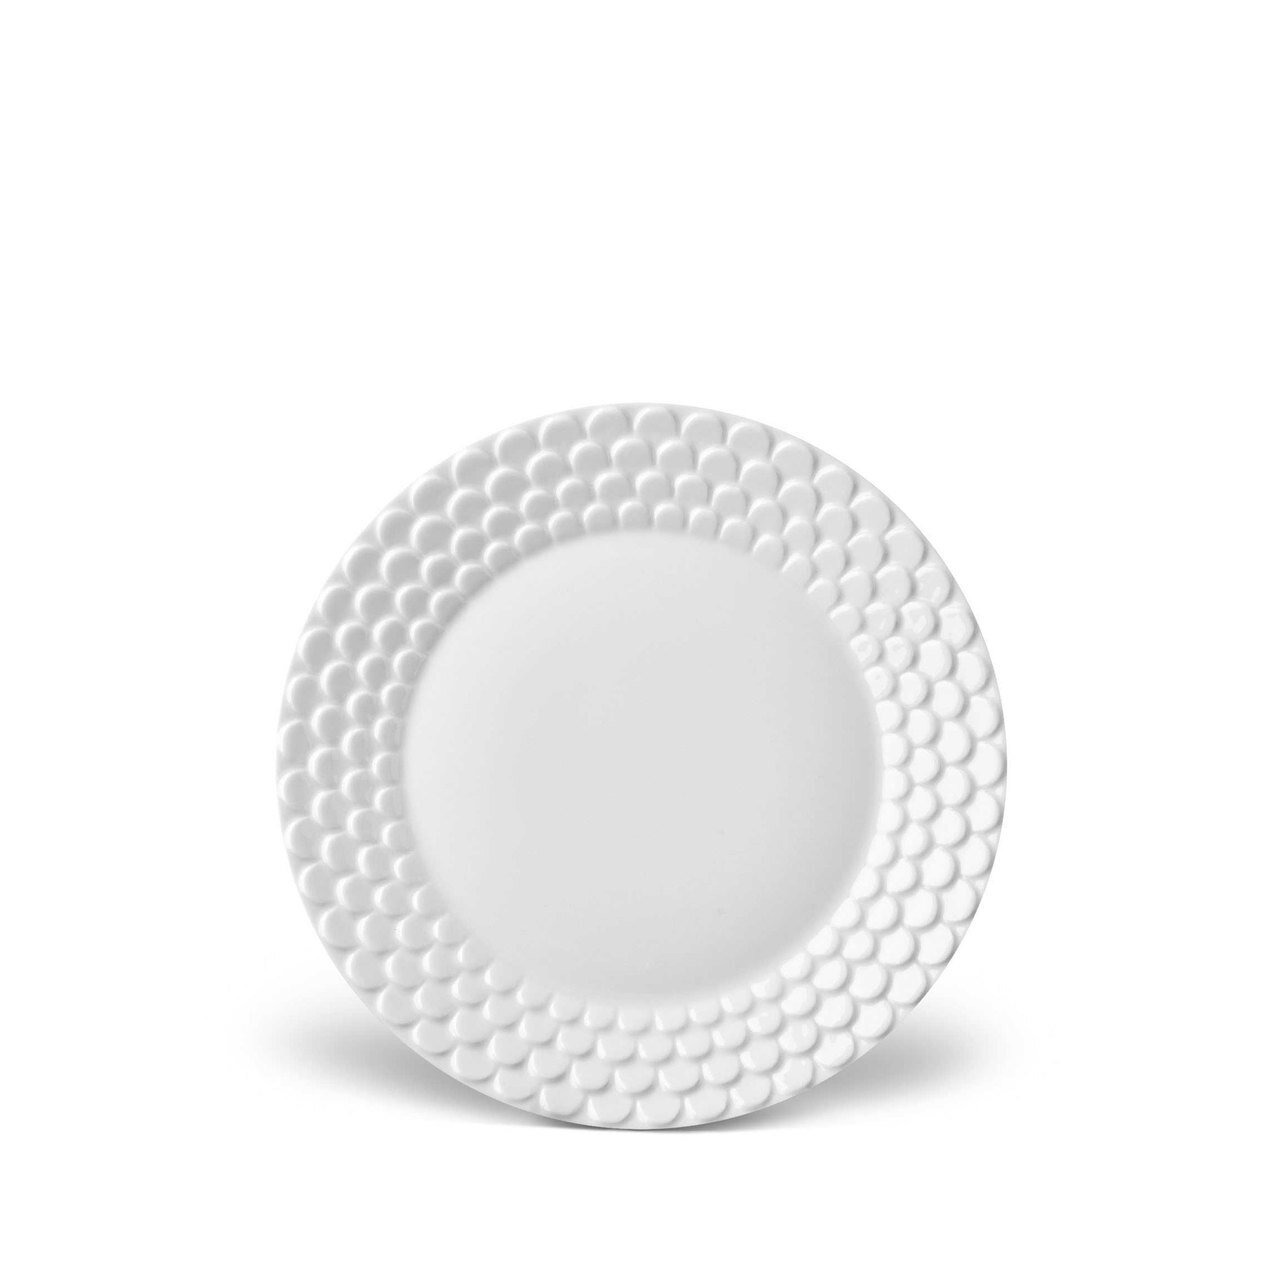 L'Objet Aegean Bread and Butter Plate White